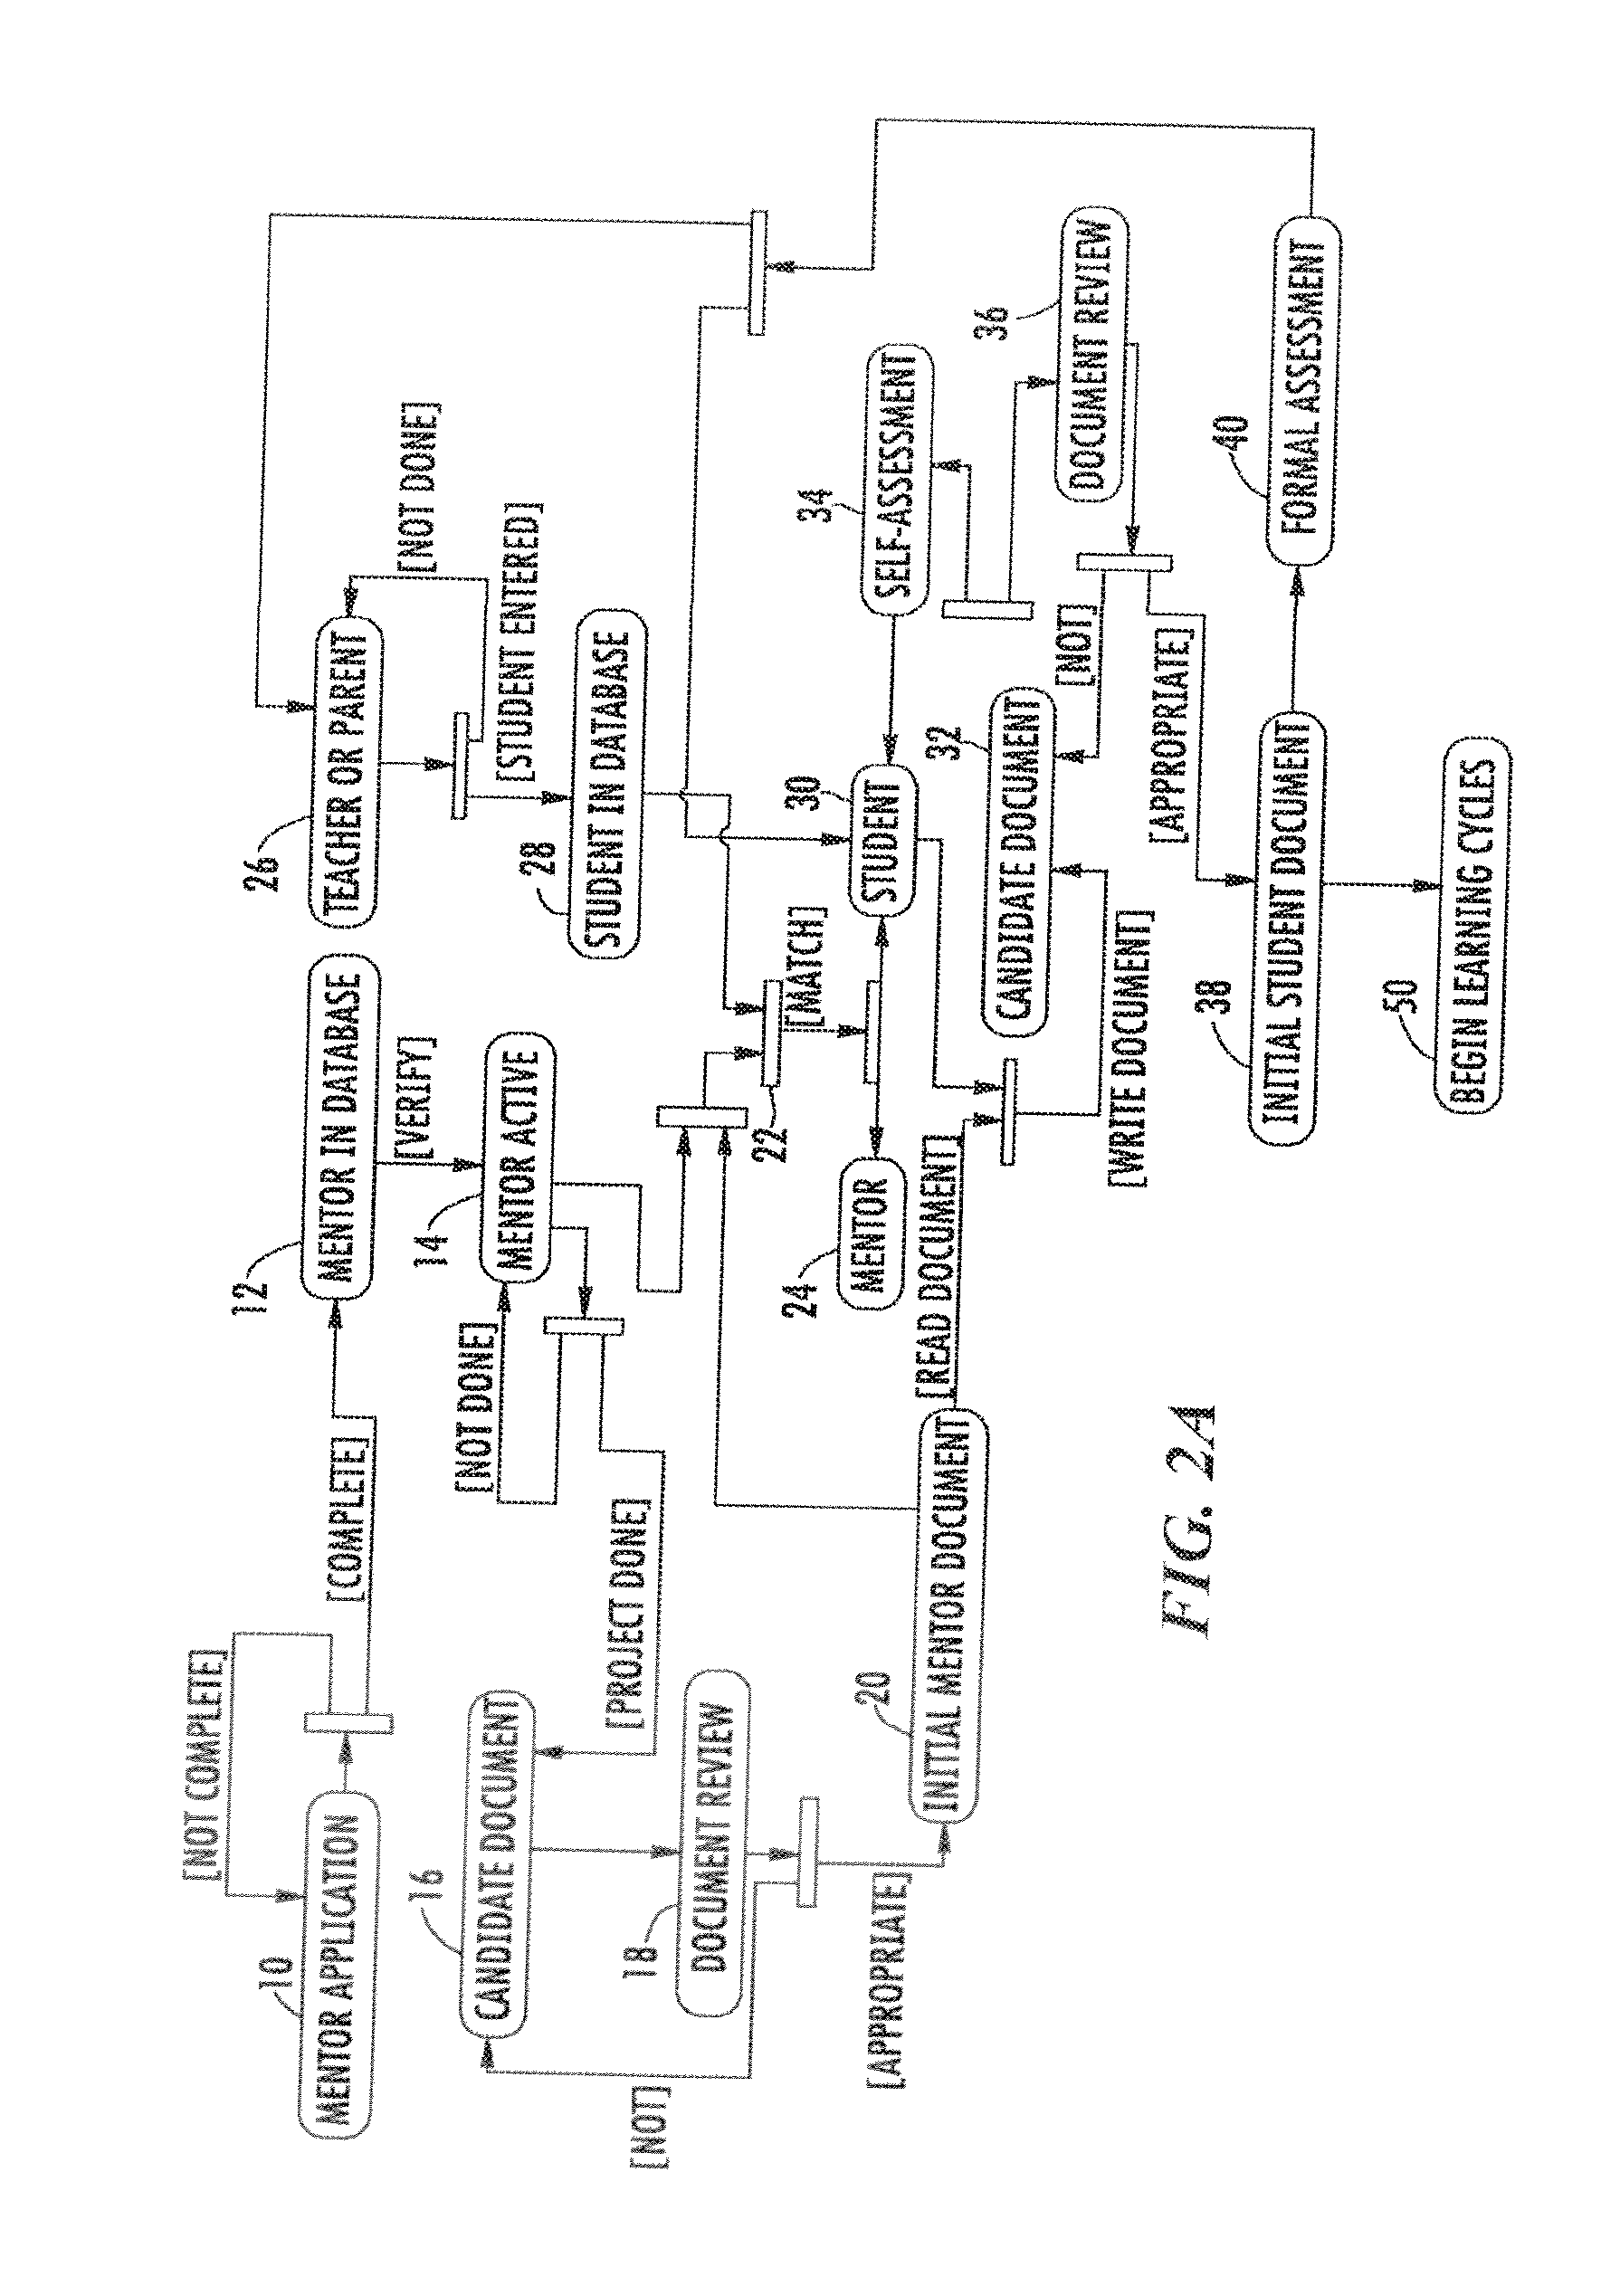 Method and system for developing process, project or problem-based learning systems within a semantic collaborative social network